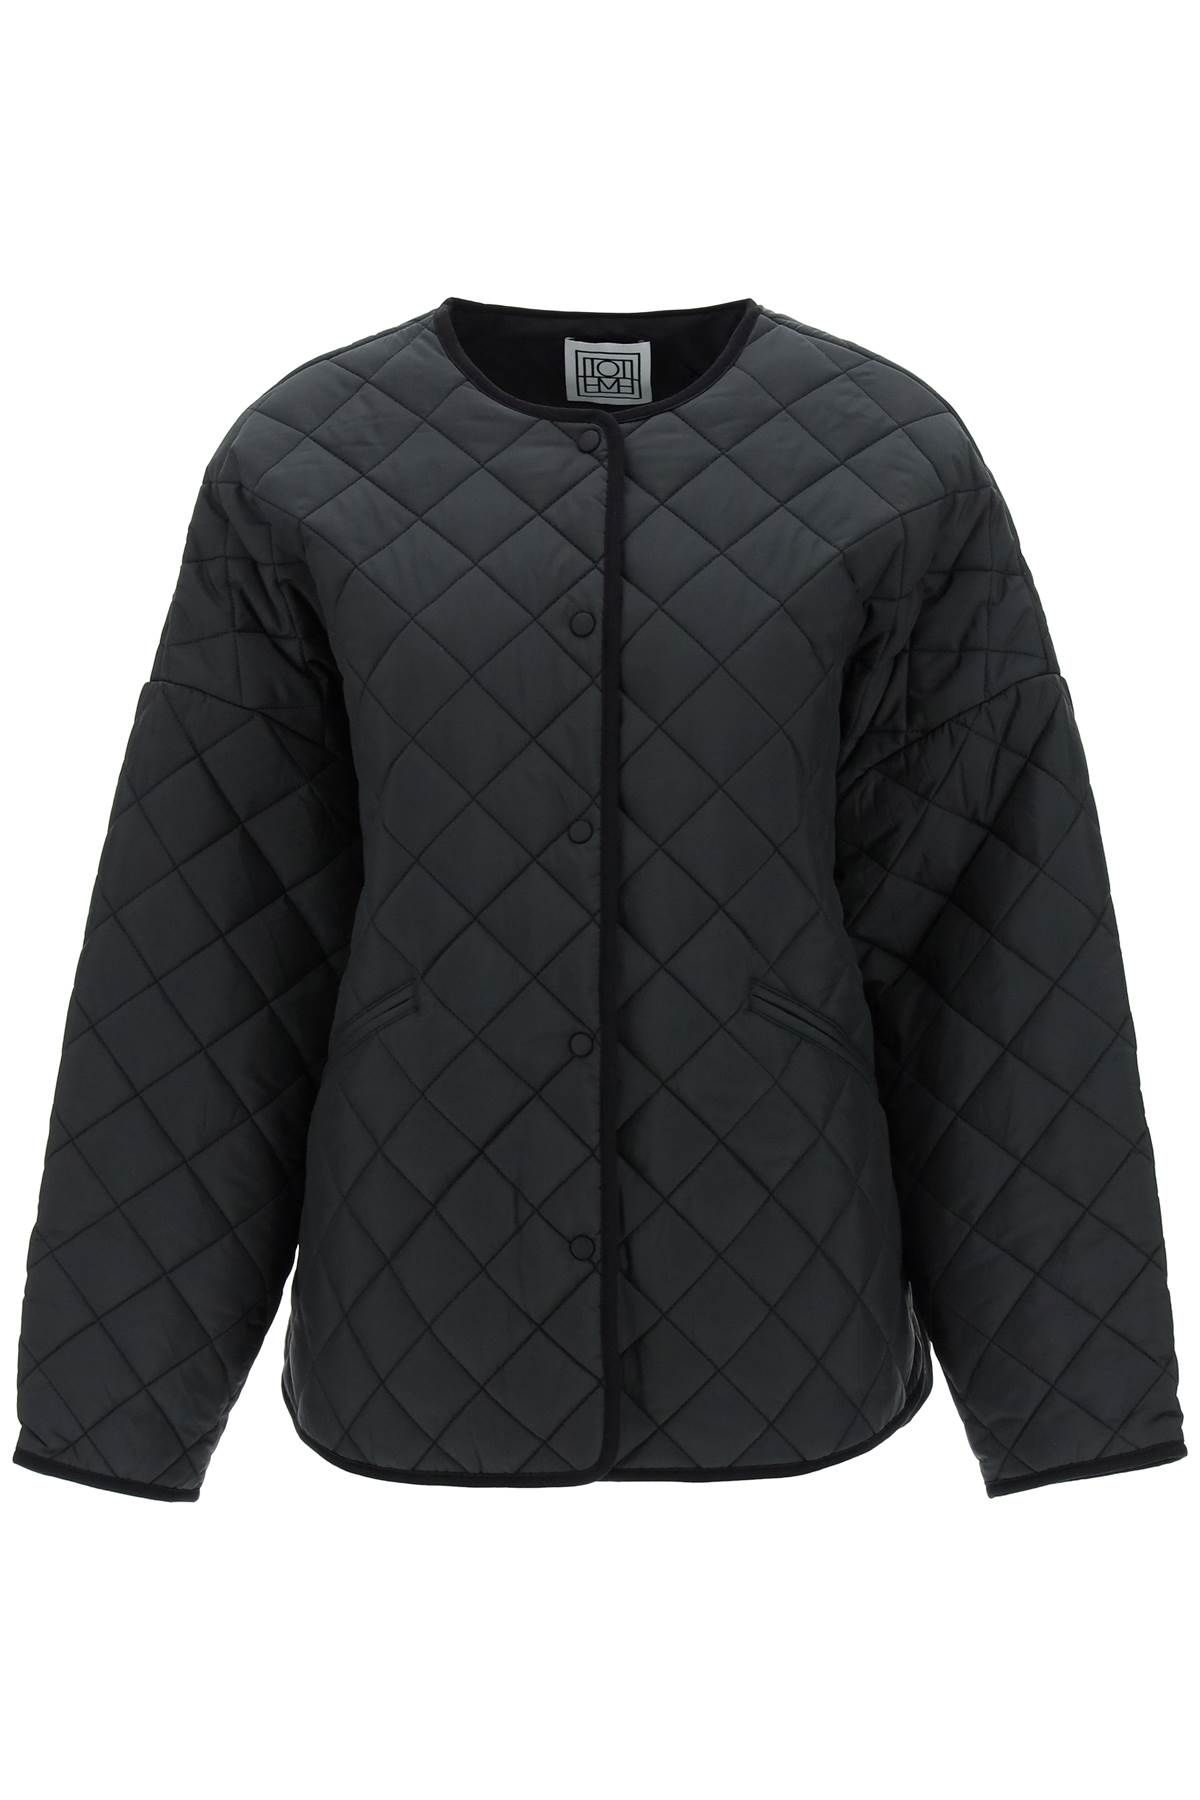 Toteme TOTEME quilted boxy jacket